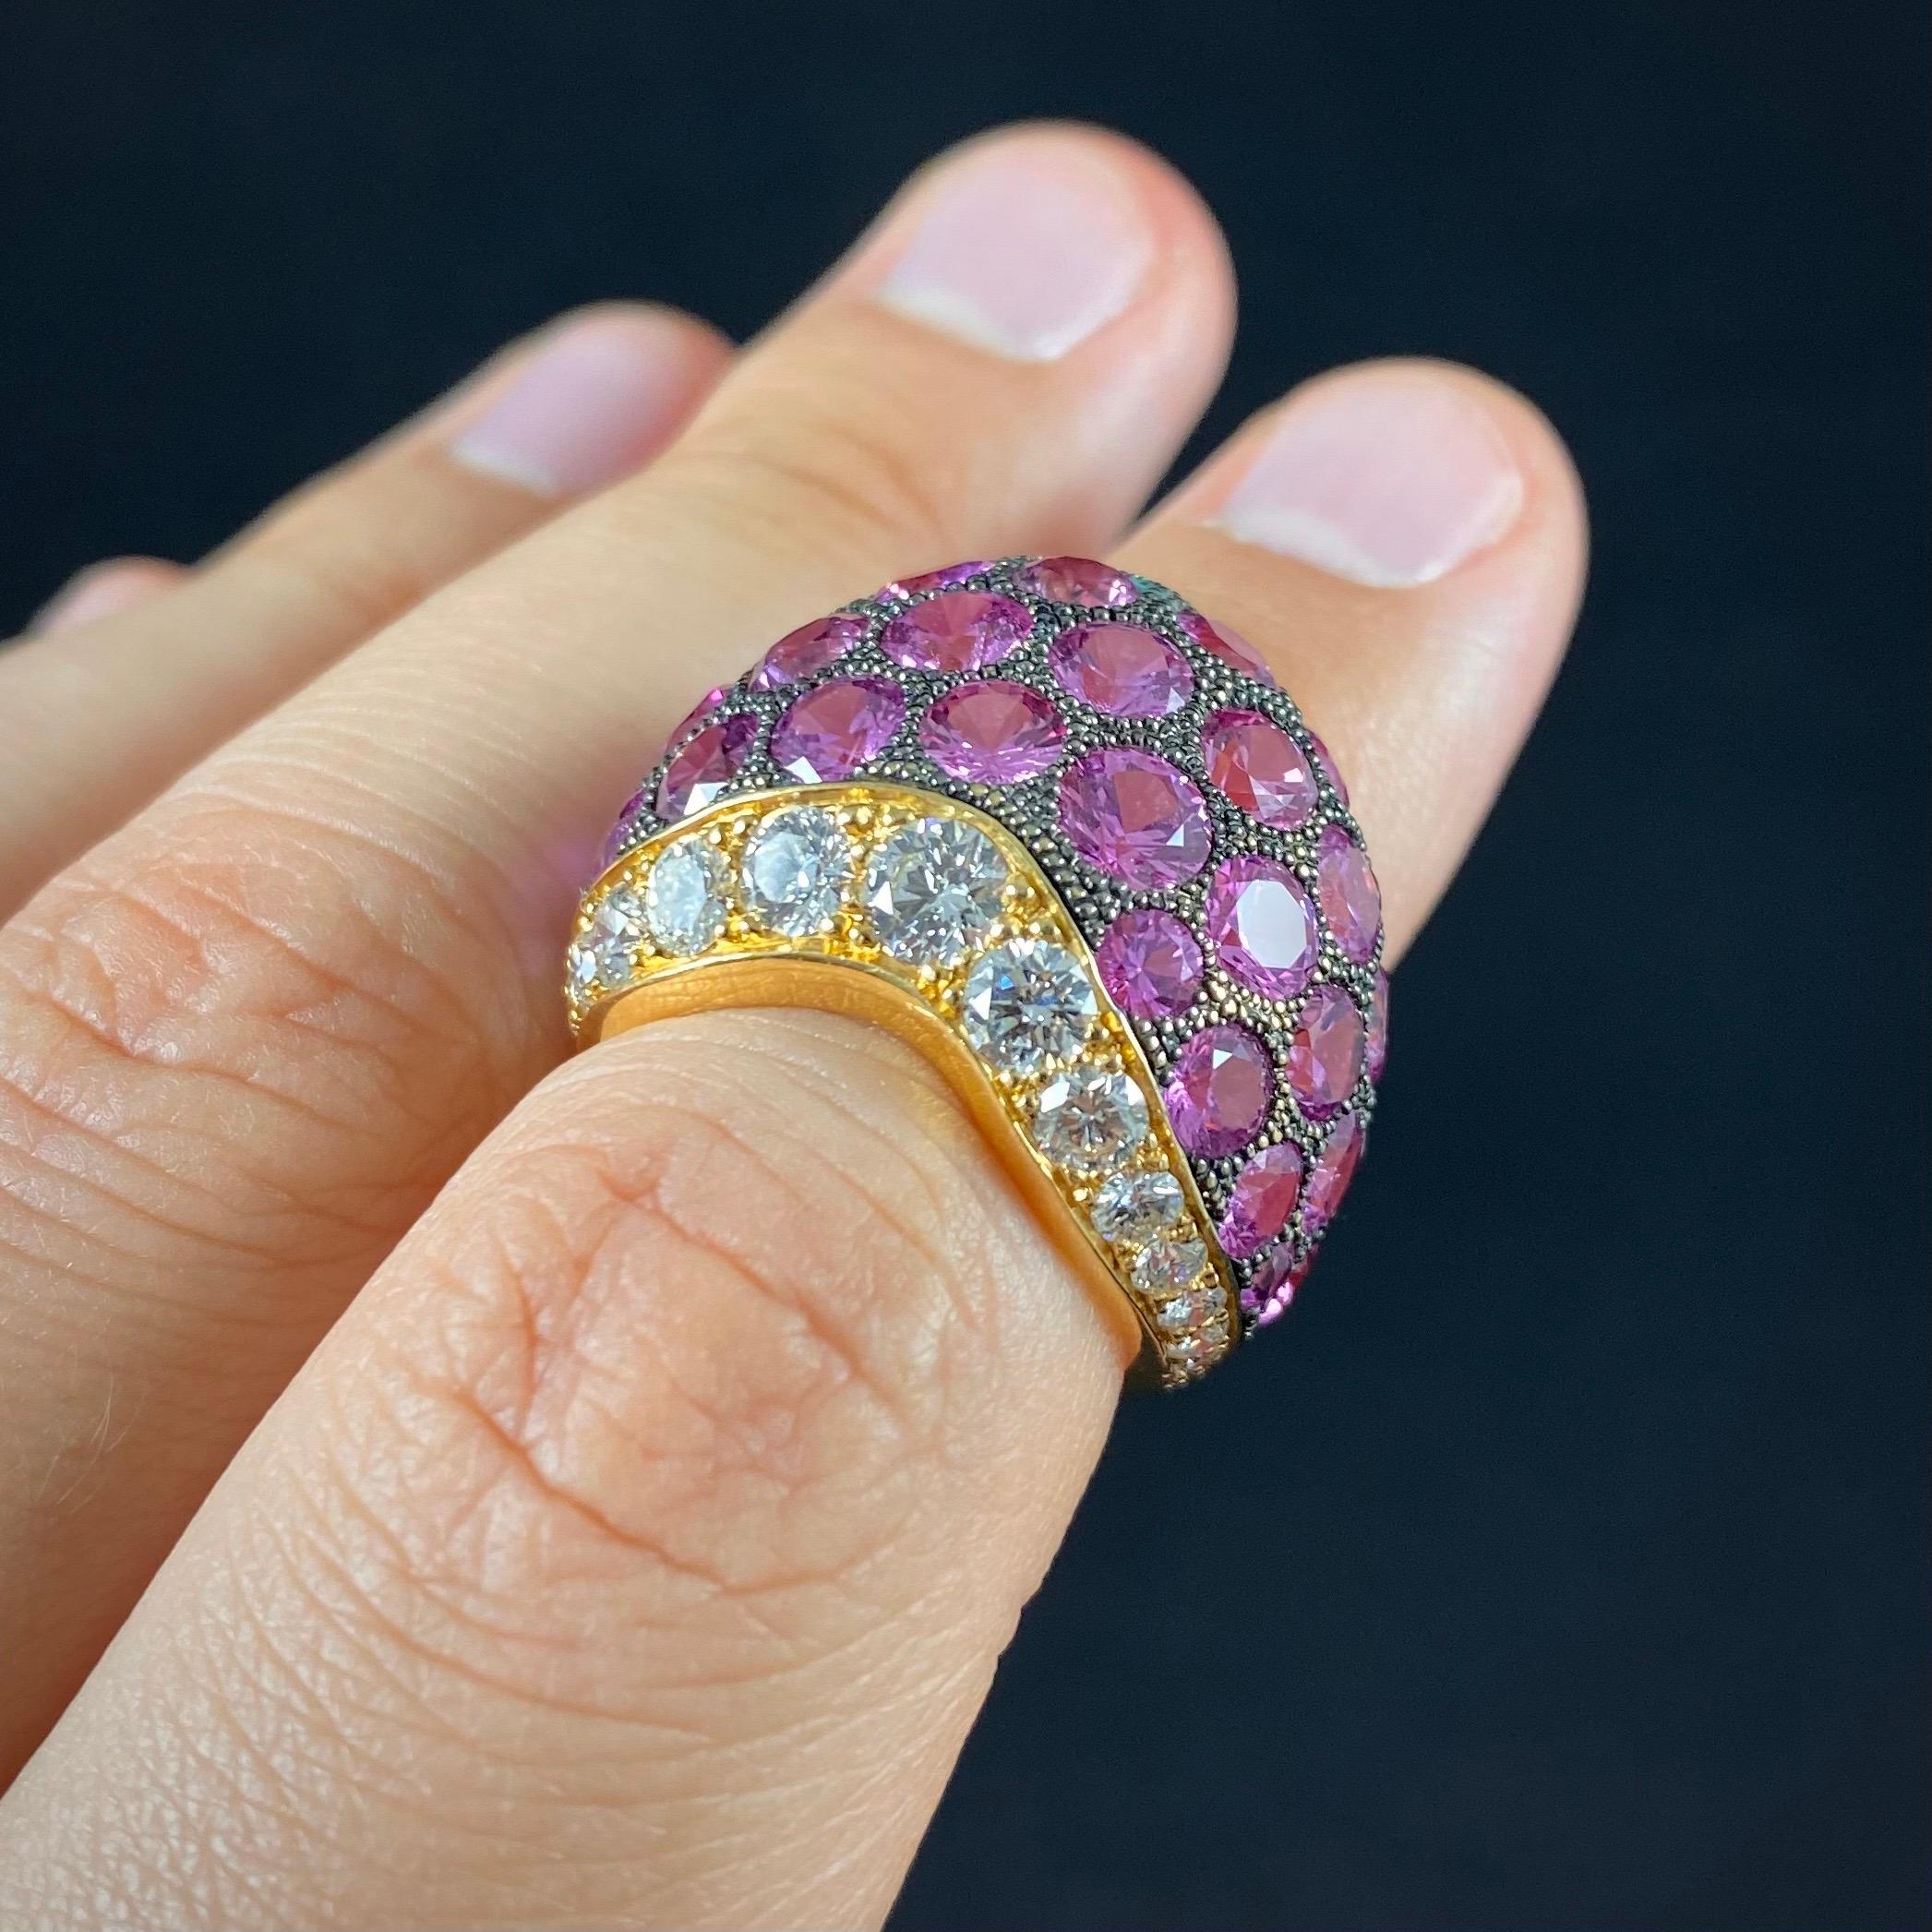 de GRISOGONO Pink Sapphire Diamond Pave Wishbone Bombe Cocktail Ring Yellow Gold In Good Condition For Sale In Lisbon, PT